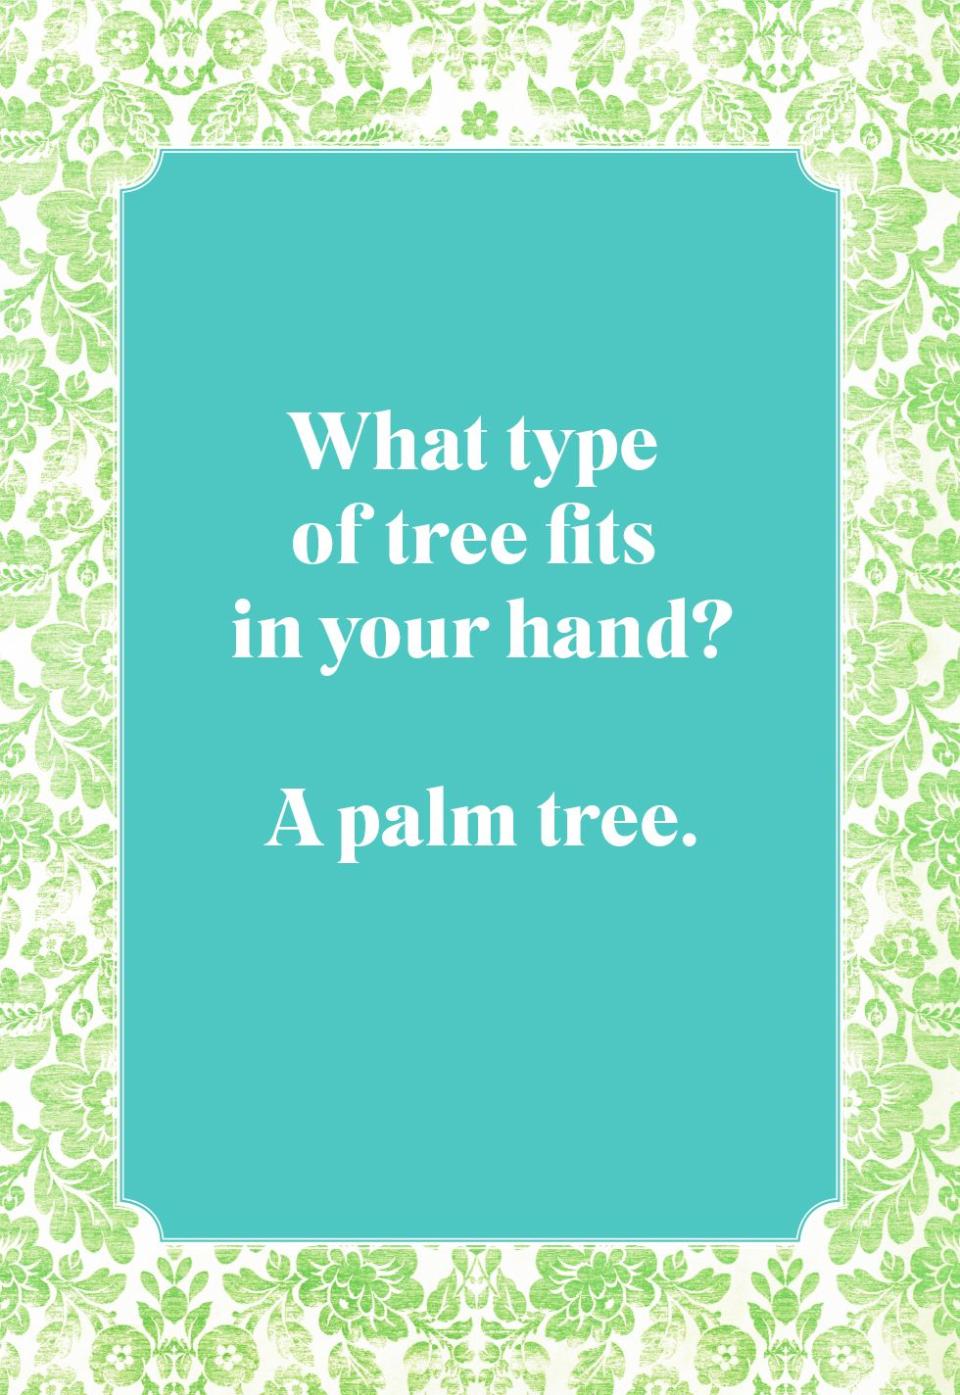 What type of tree fits in your hand?